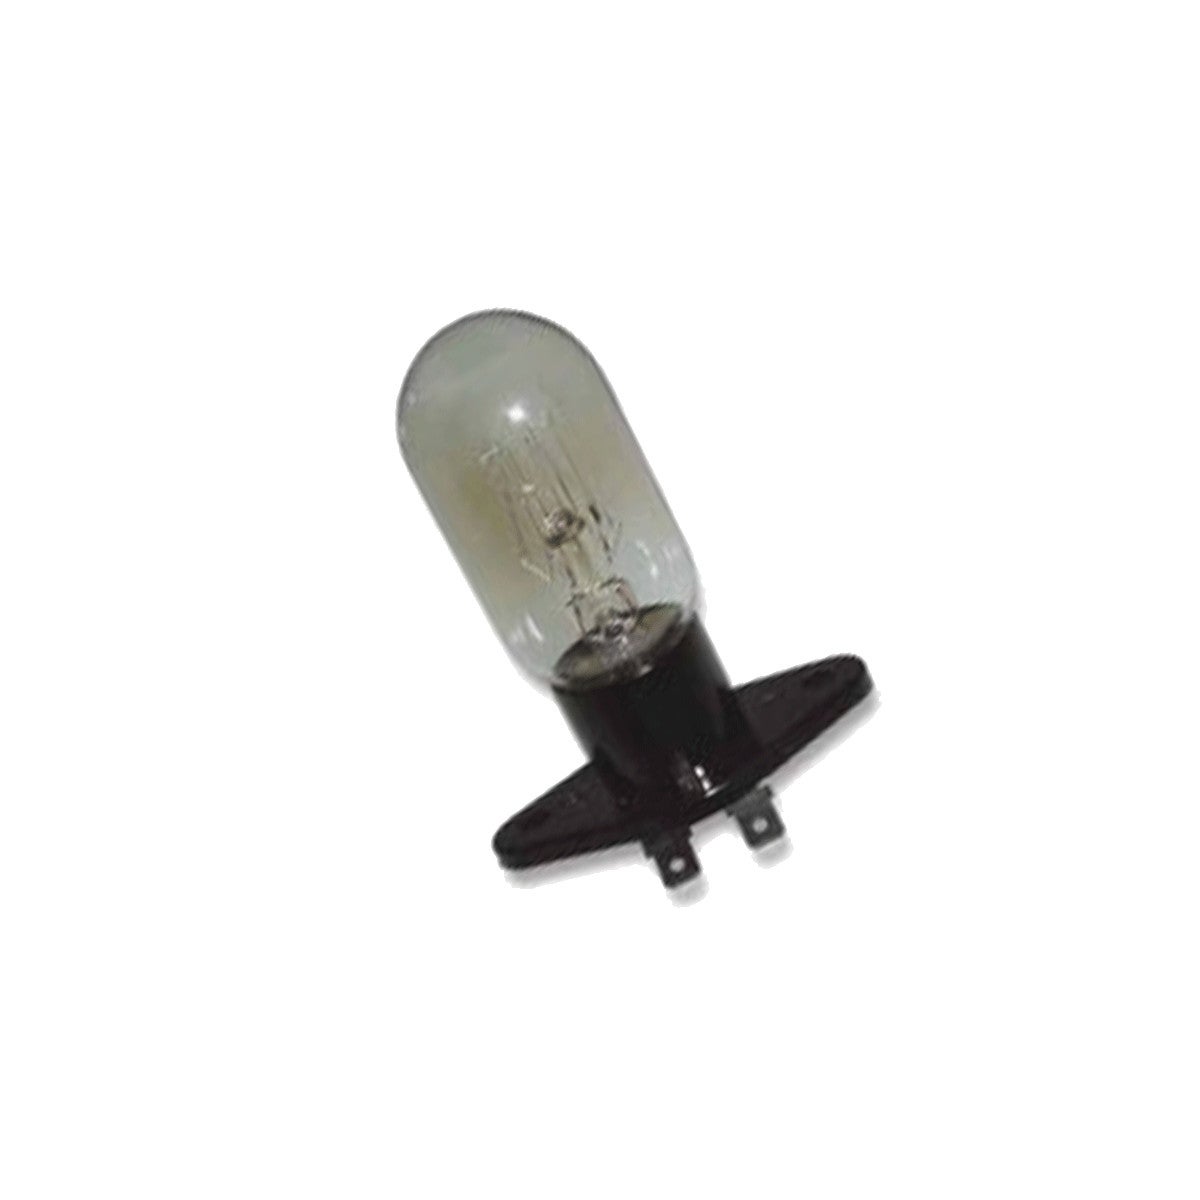 481213488071 WHIRLPOOL GT283NB n°9 lampe pour four a micro-ondes